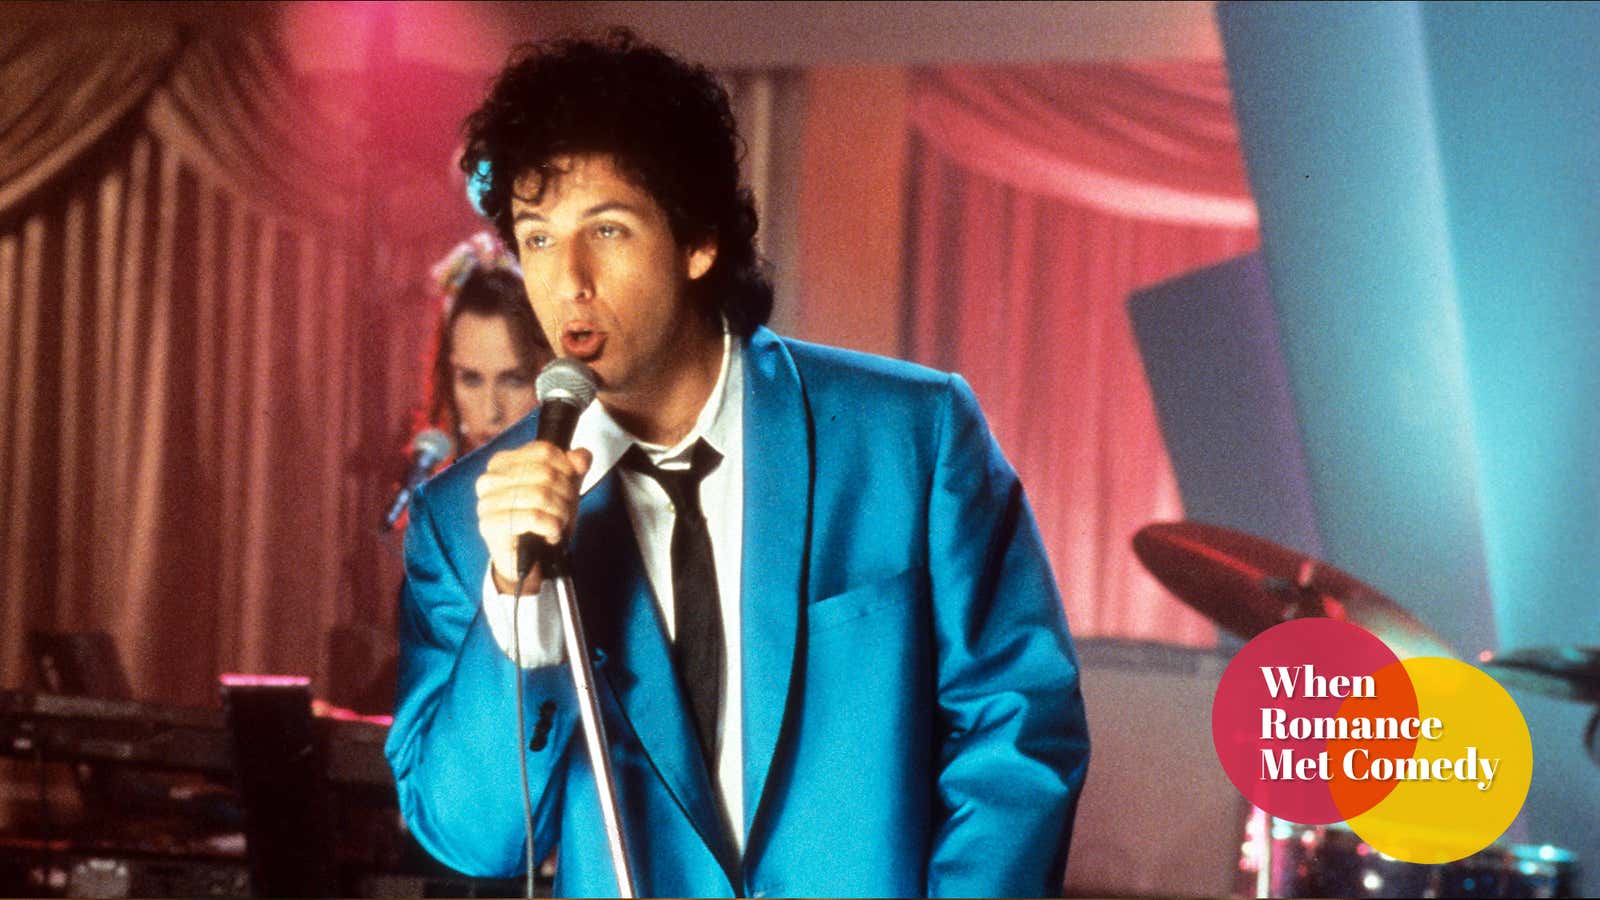 Adam Sandler’s sweetness makes <i>The Wedding Singer</i> a rom-com worth growing old with